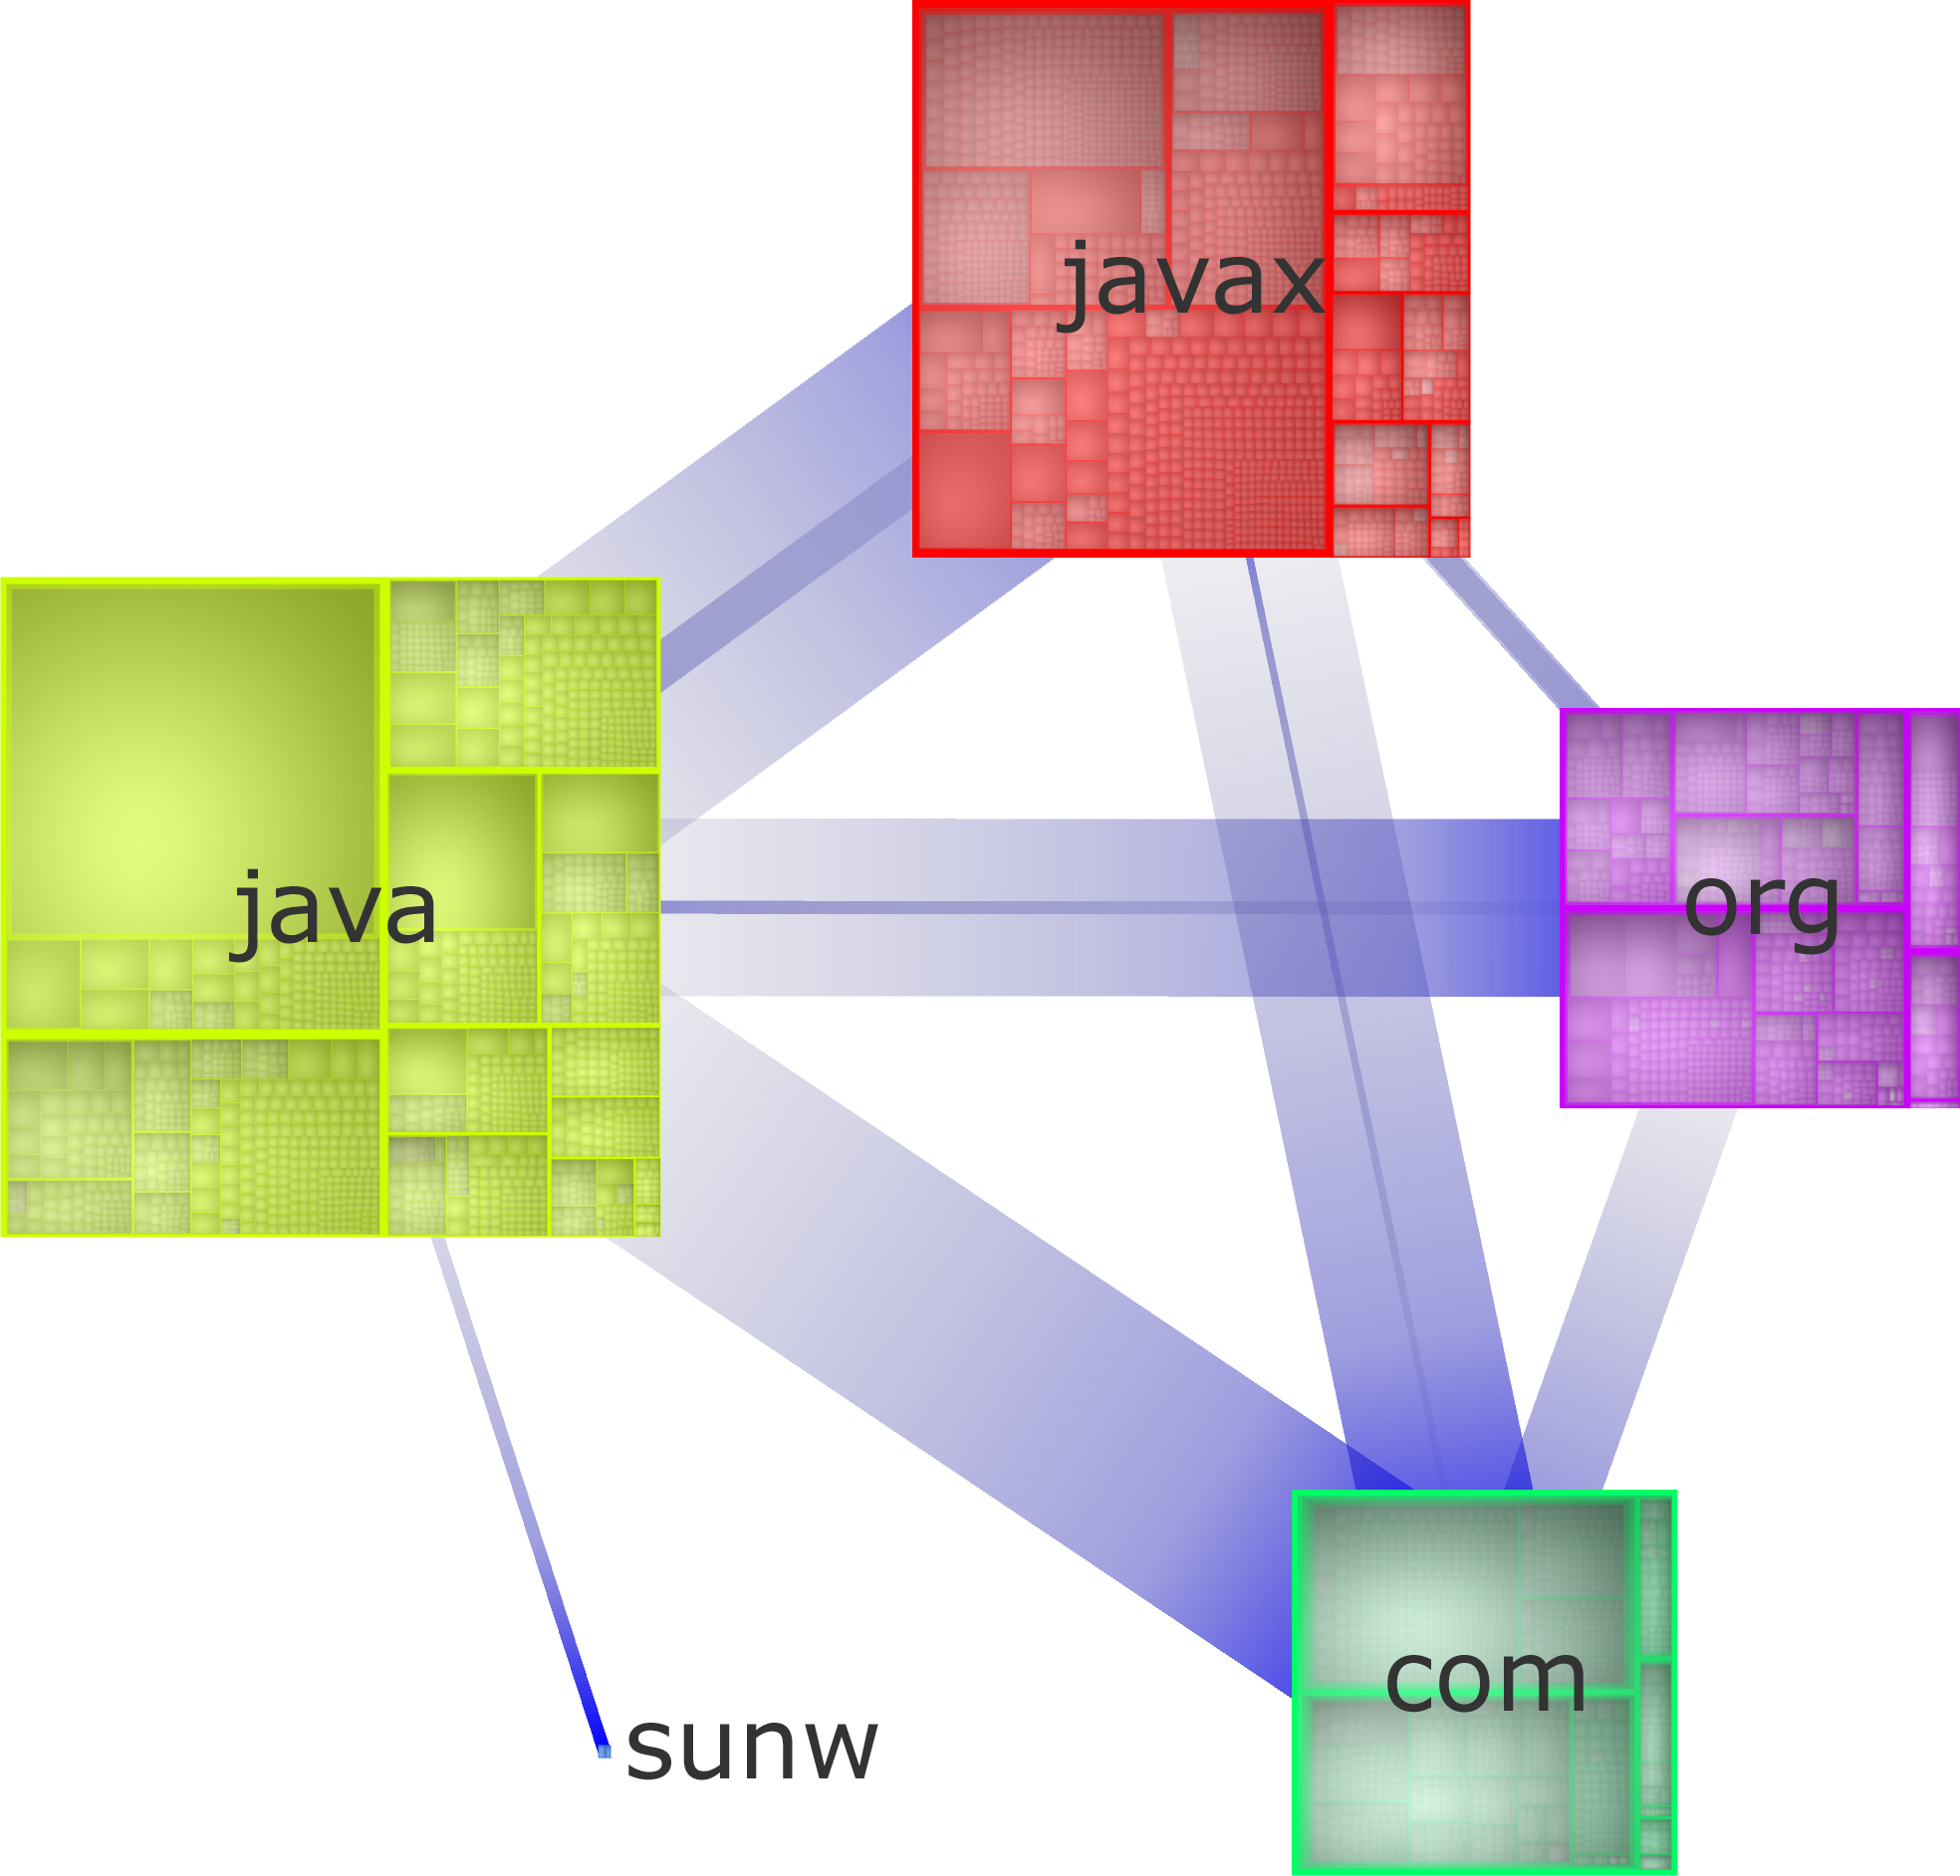 Exploring Relations within Software Systems Using Treemap Enhanced Hierarchical Graphs